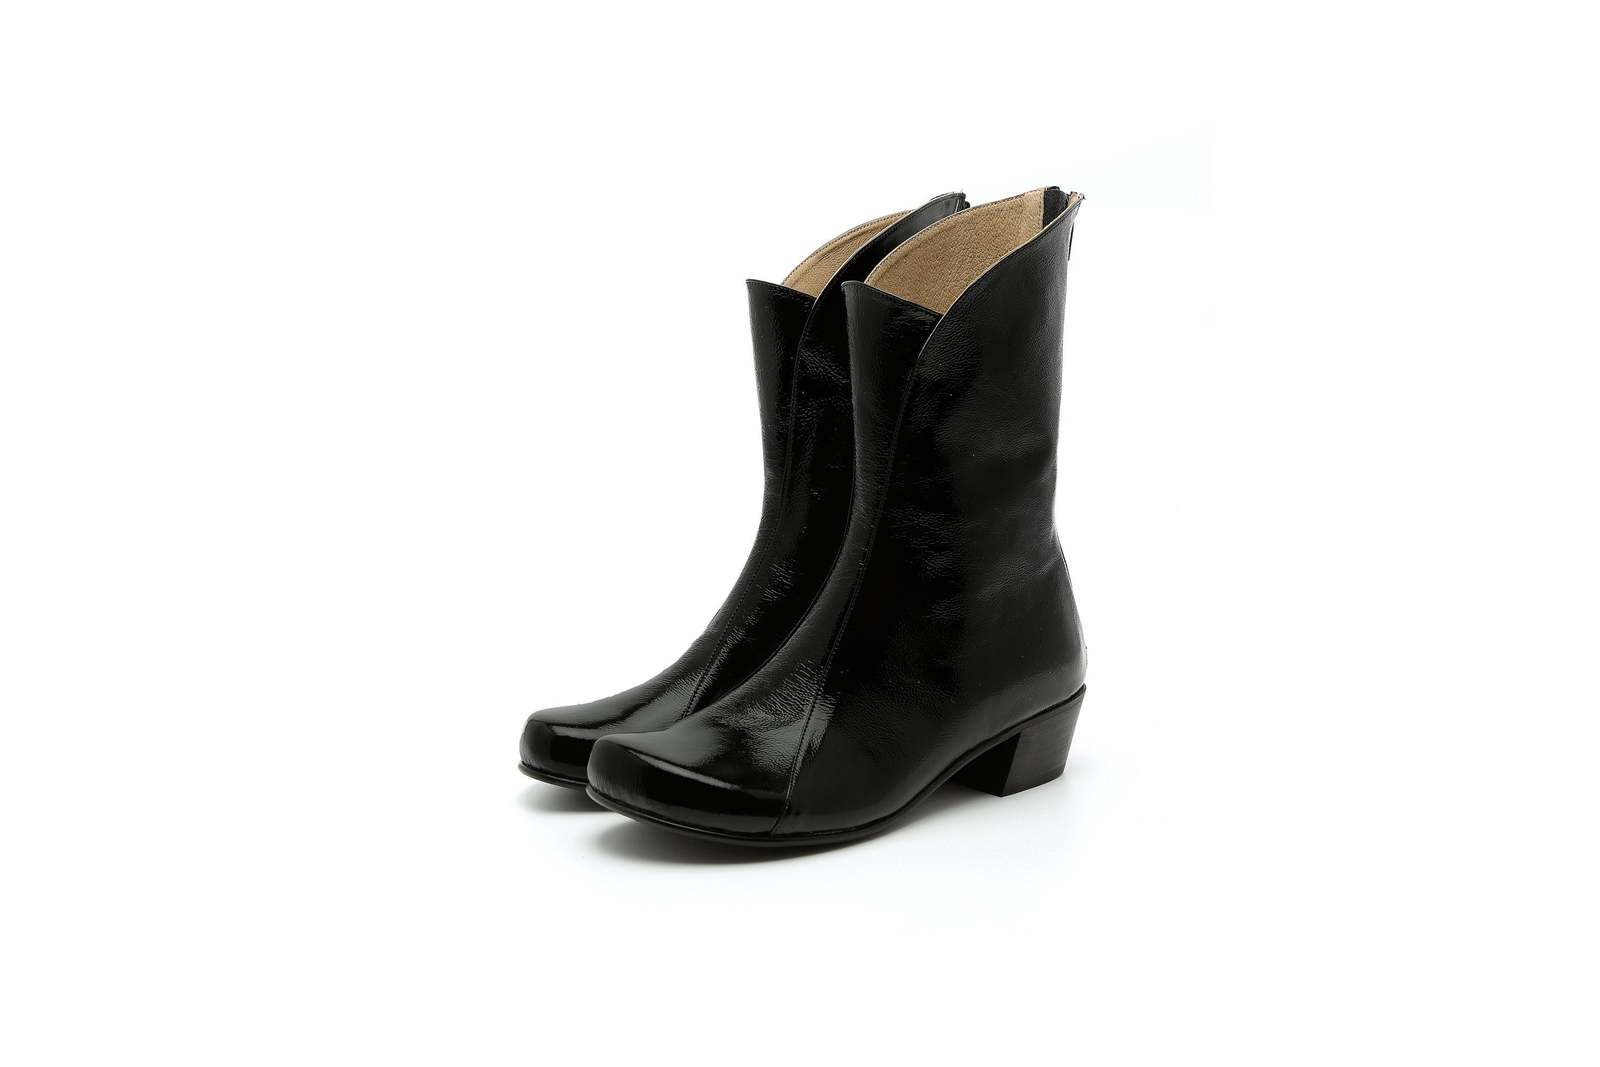 New Black Low Heel Mid Calf Premium Quality Leather High Ankle Women Classy Boot